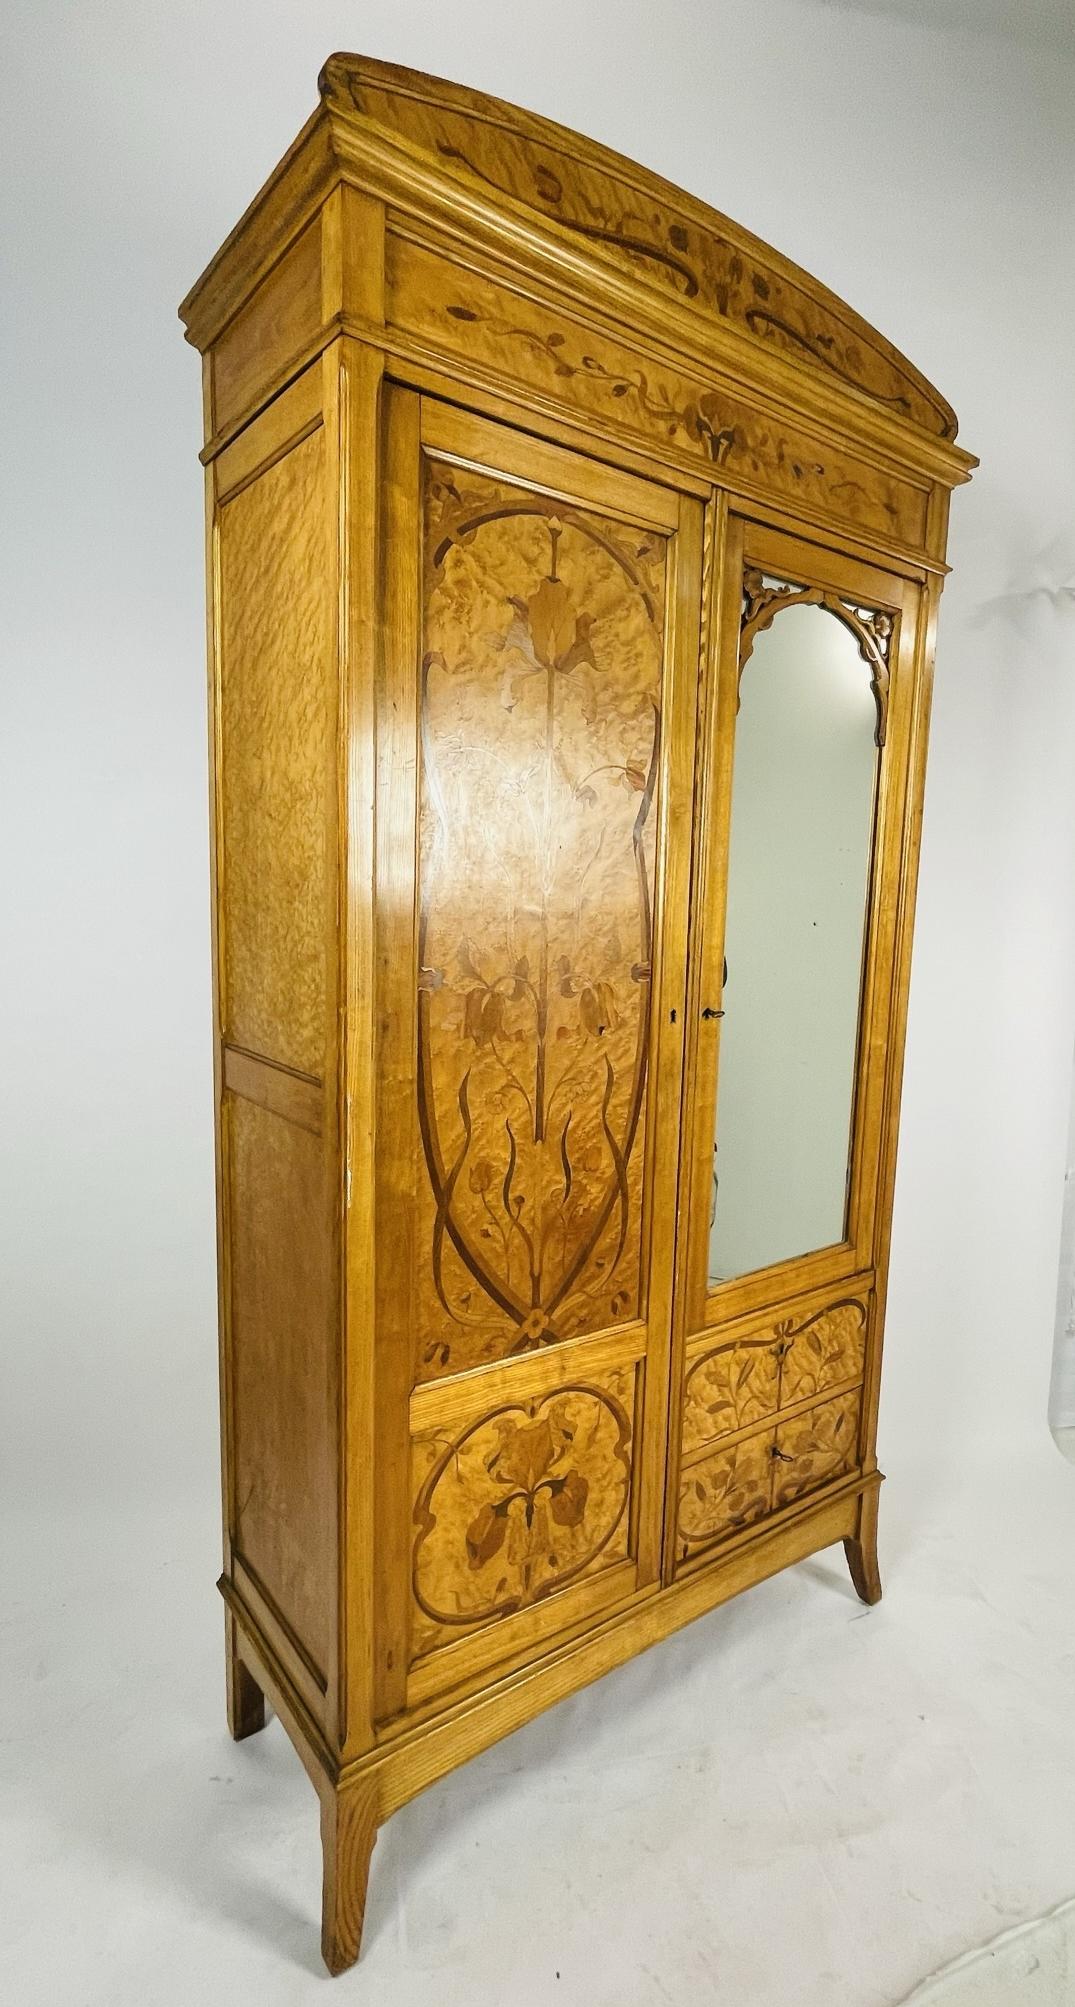 Introducing a stunning piece of furniture that will elevate any room's decor - the Hand-Made Tall Armoire made in France, Early 1900s. This armoire is a rare find, crafted with care and precision by skilled artisans in France over a century